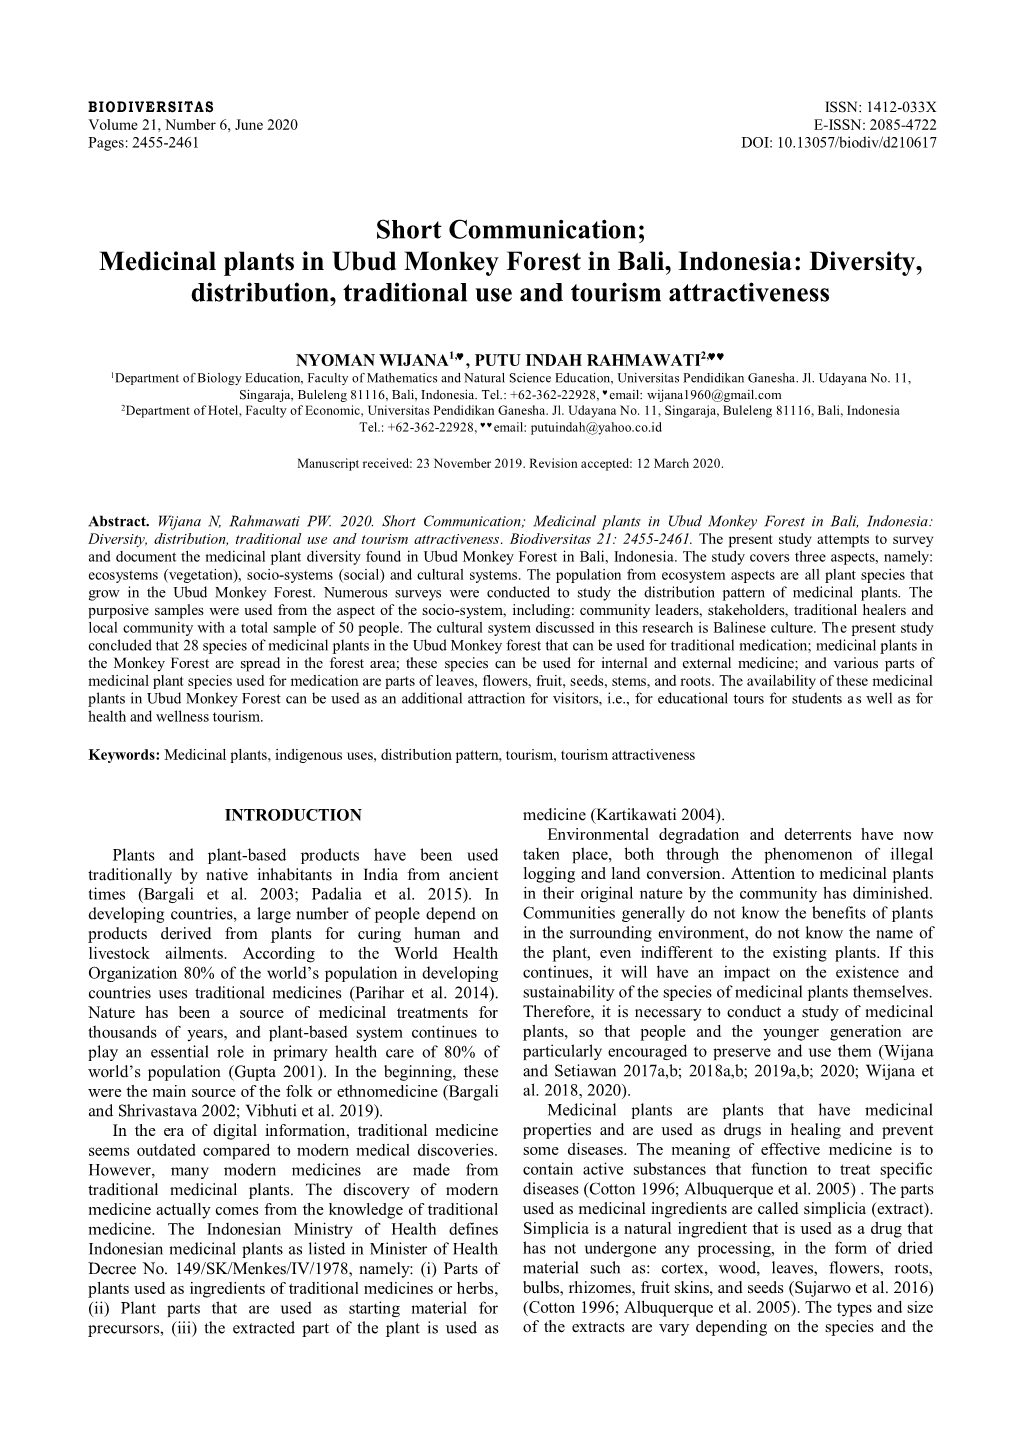 Medicinal Plants in Ubud Monkey Forest in Bali, Indonesia: Diversity, Distribution, Traditional Use and Tourism Attractiveness